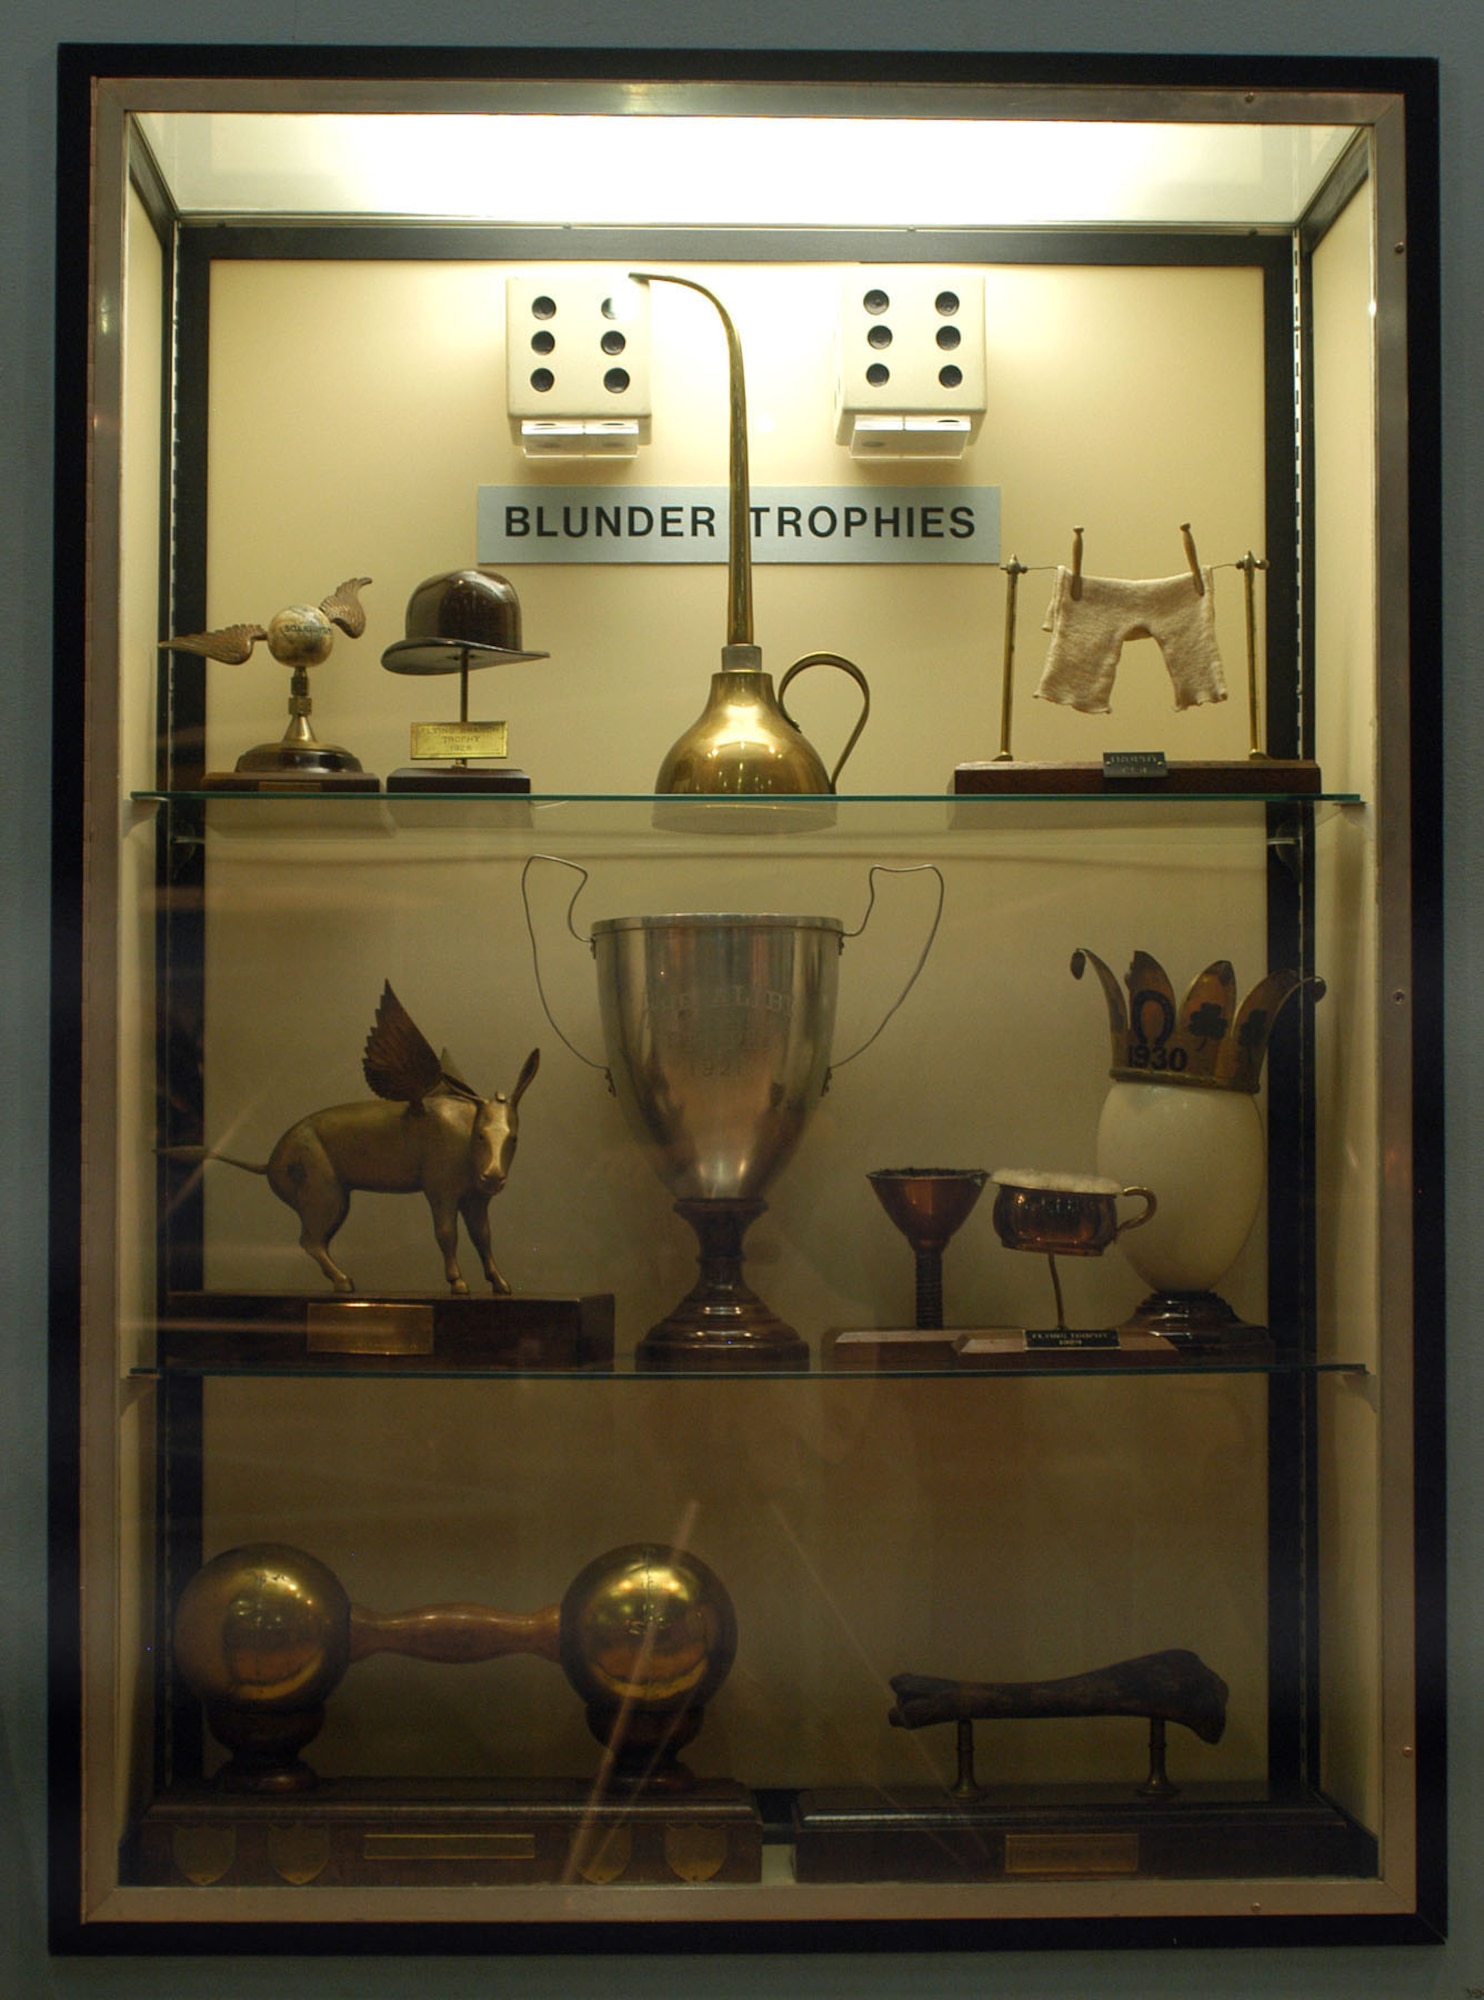 DAYTON, Ohio -- Blunder Trophies exhibit at the National Museum of the United States Air Force. (U.S. Air Force photo)